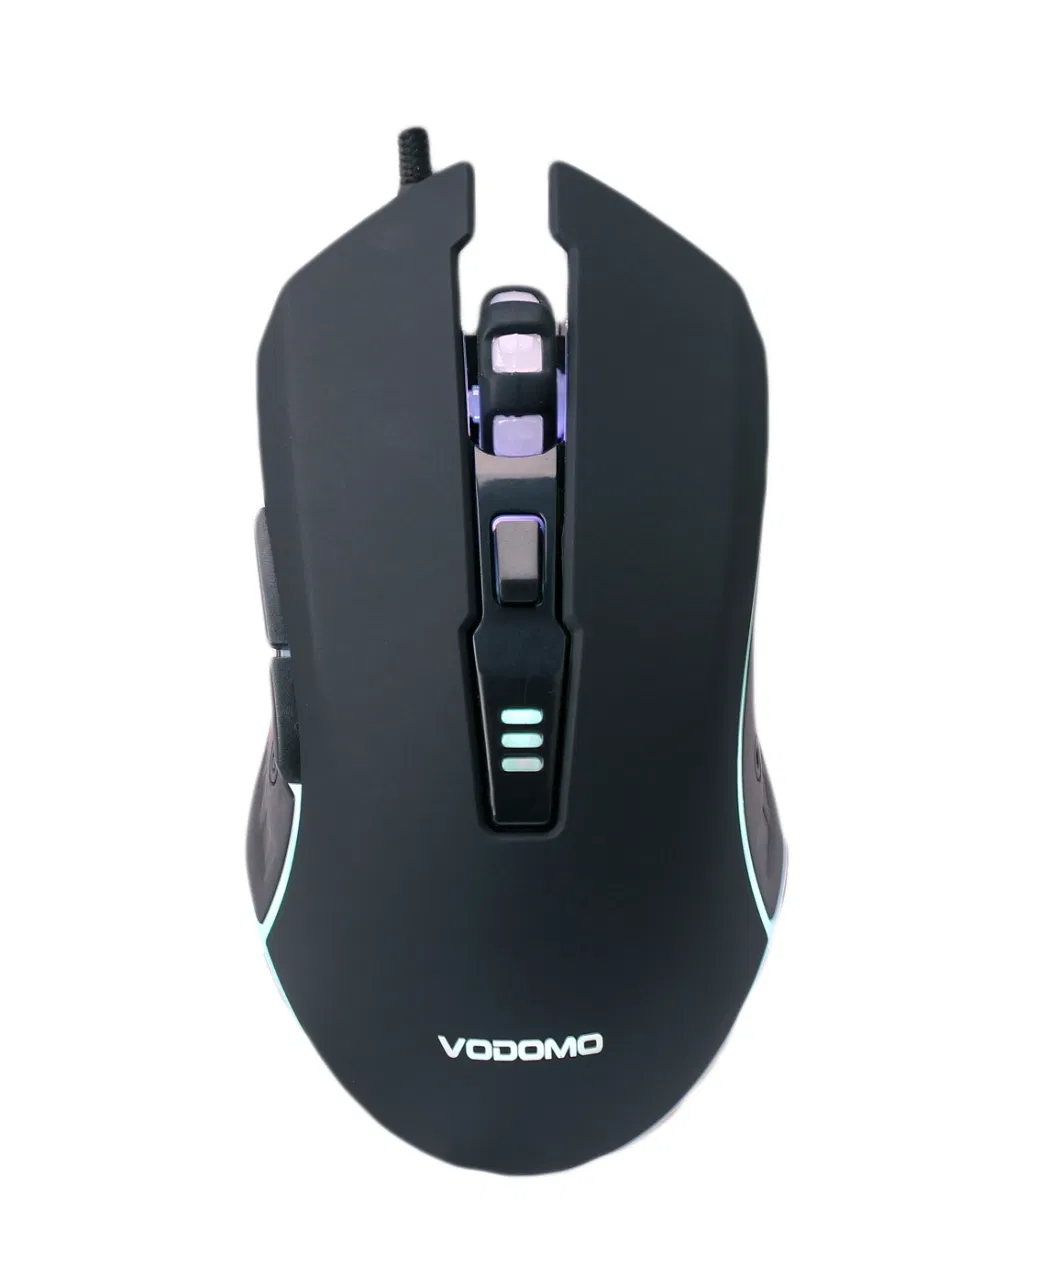 Mouse, Keyboard Gaming Combo; Cool Keyboard, 6D Gaming Mouse